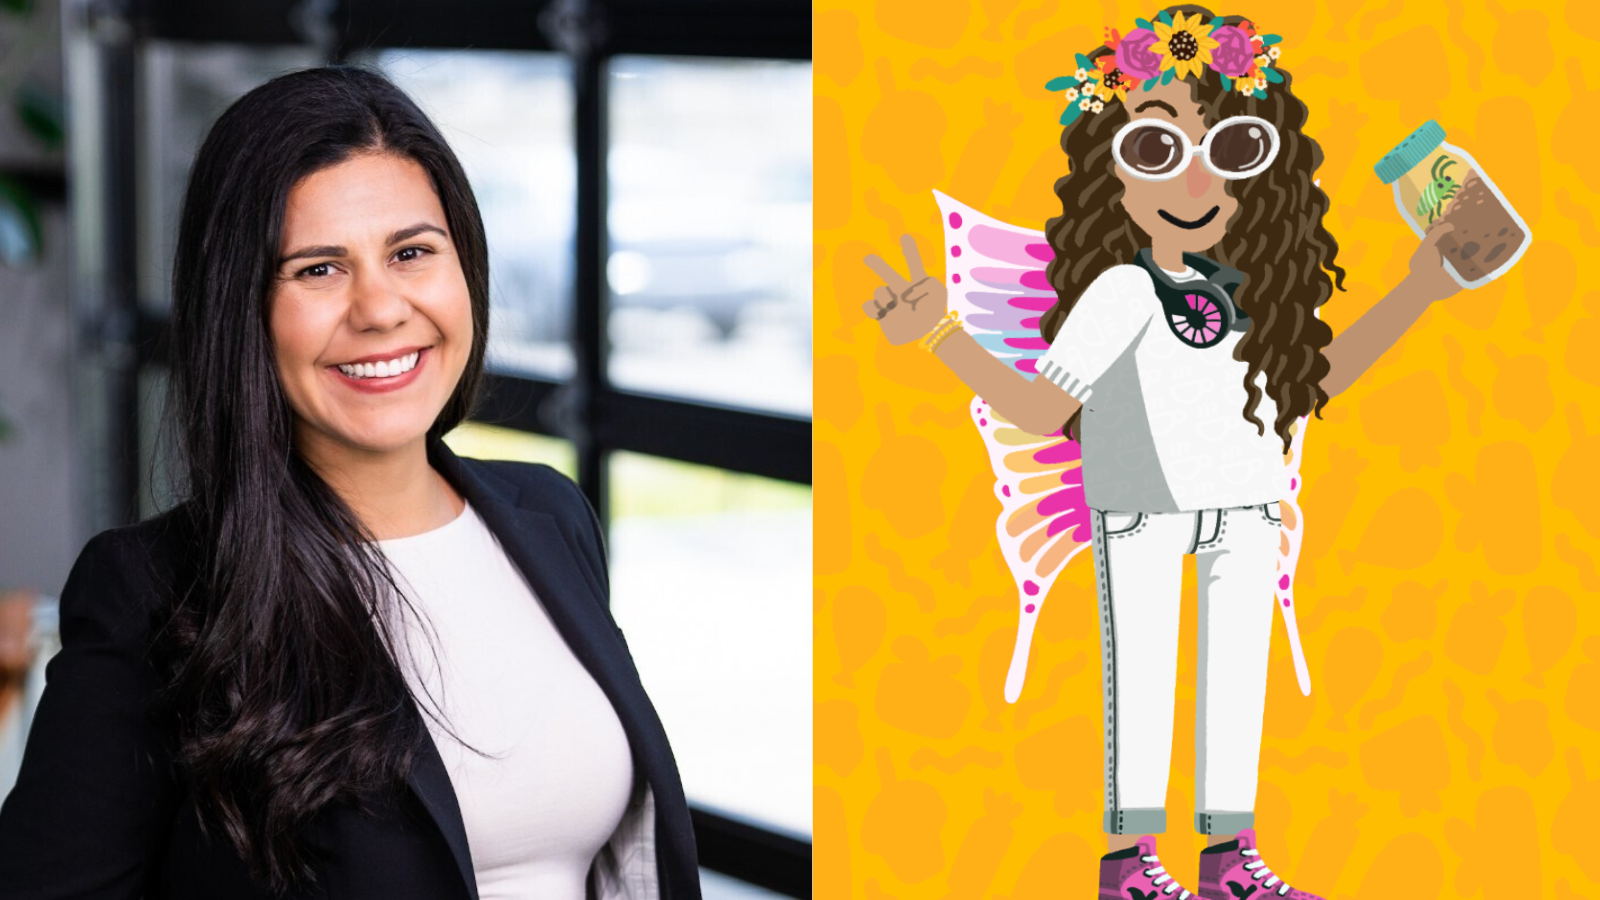 Maiana Aguilar, GoGuardian's VP of Education, and her virtual avatar